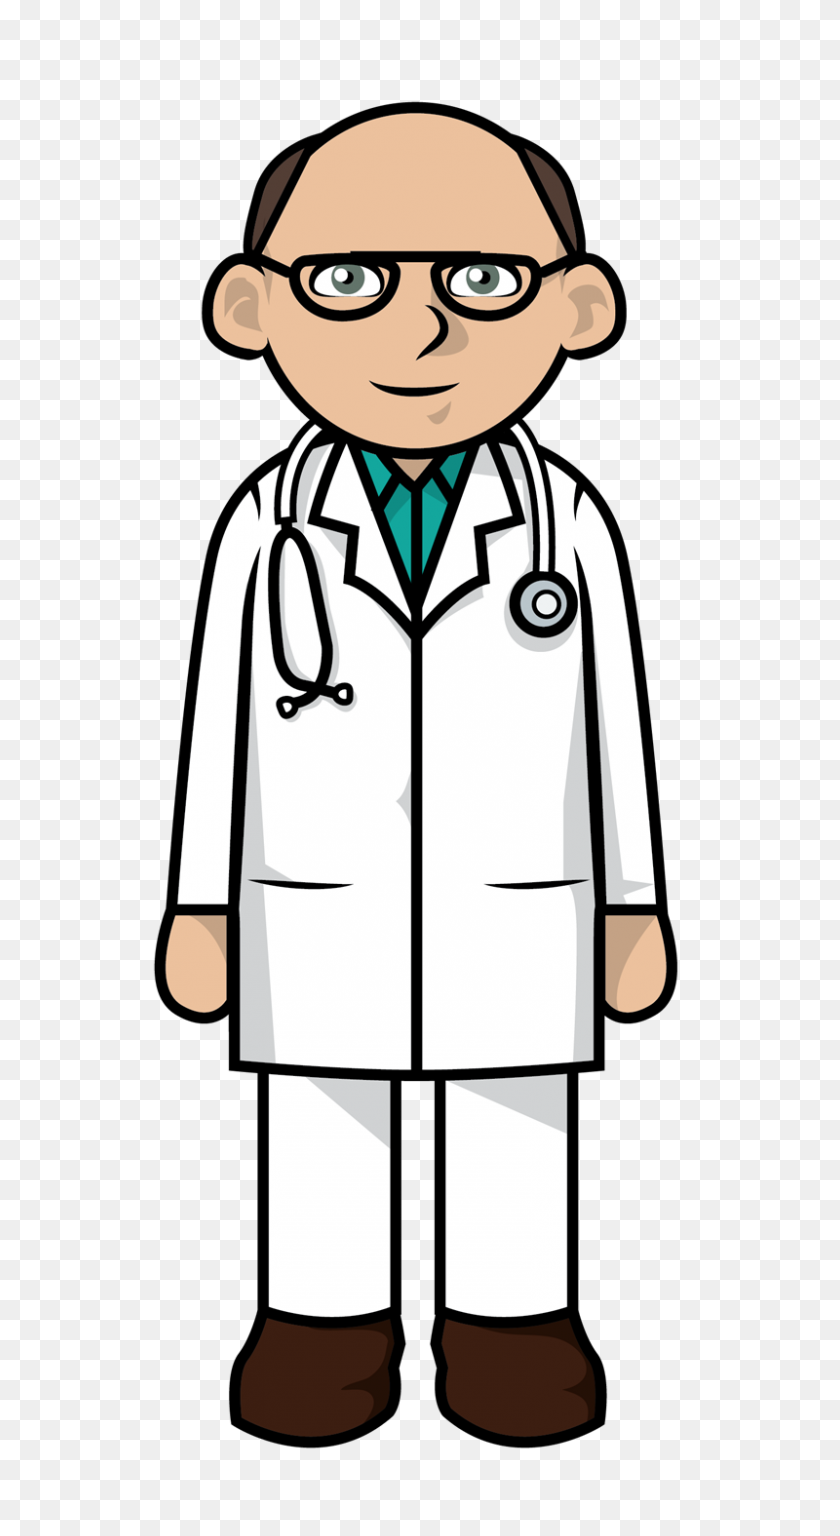 800x1514 Funny Doctor Clipart Free Download Best Funny Doctor Clipart - Doctor Clipart Free